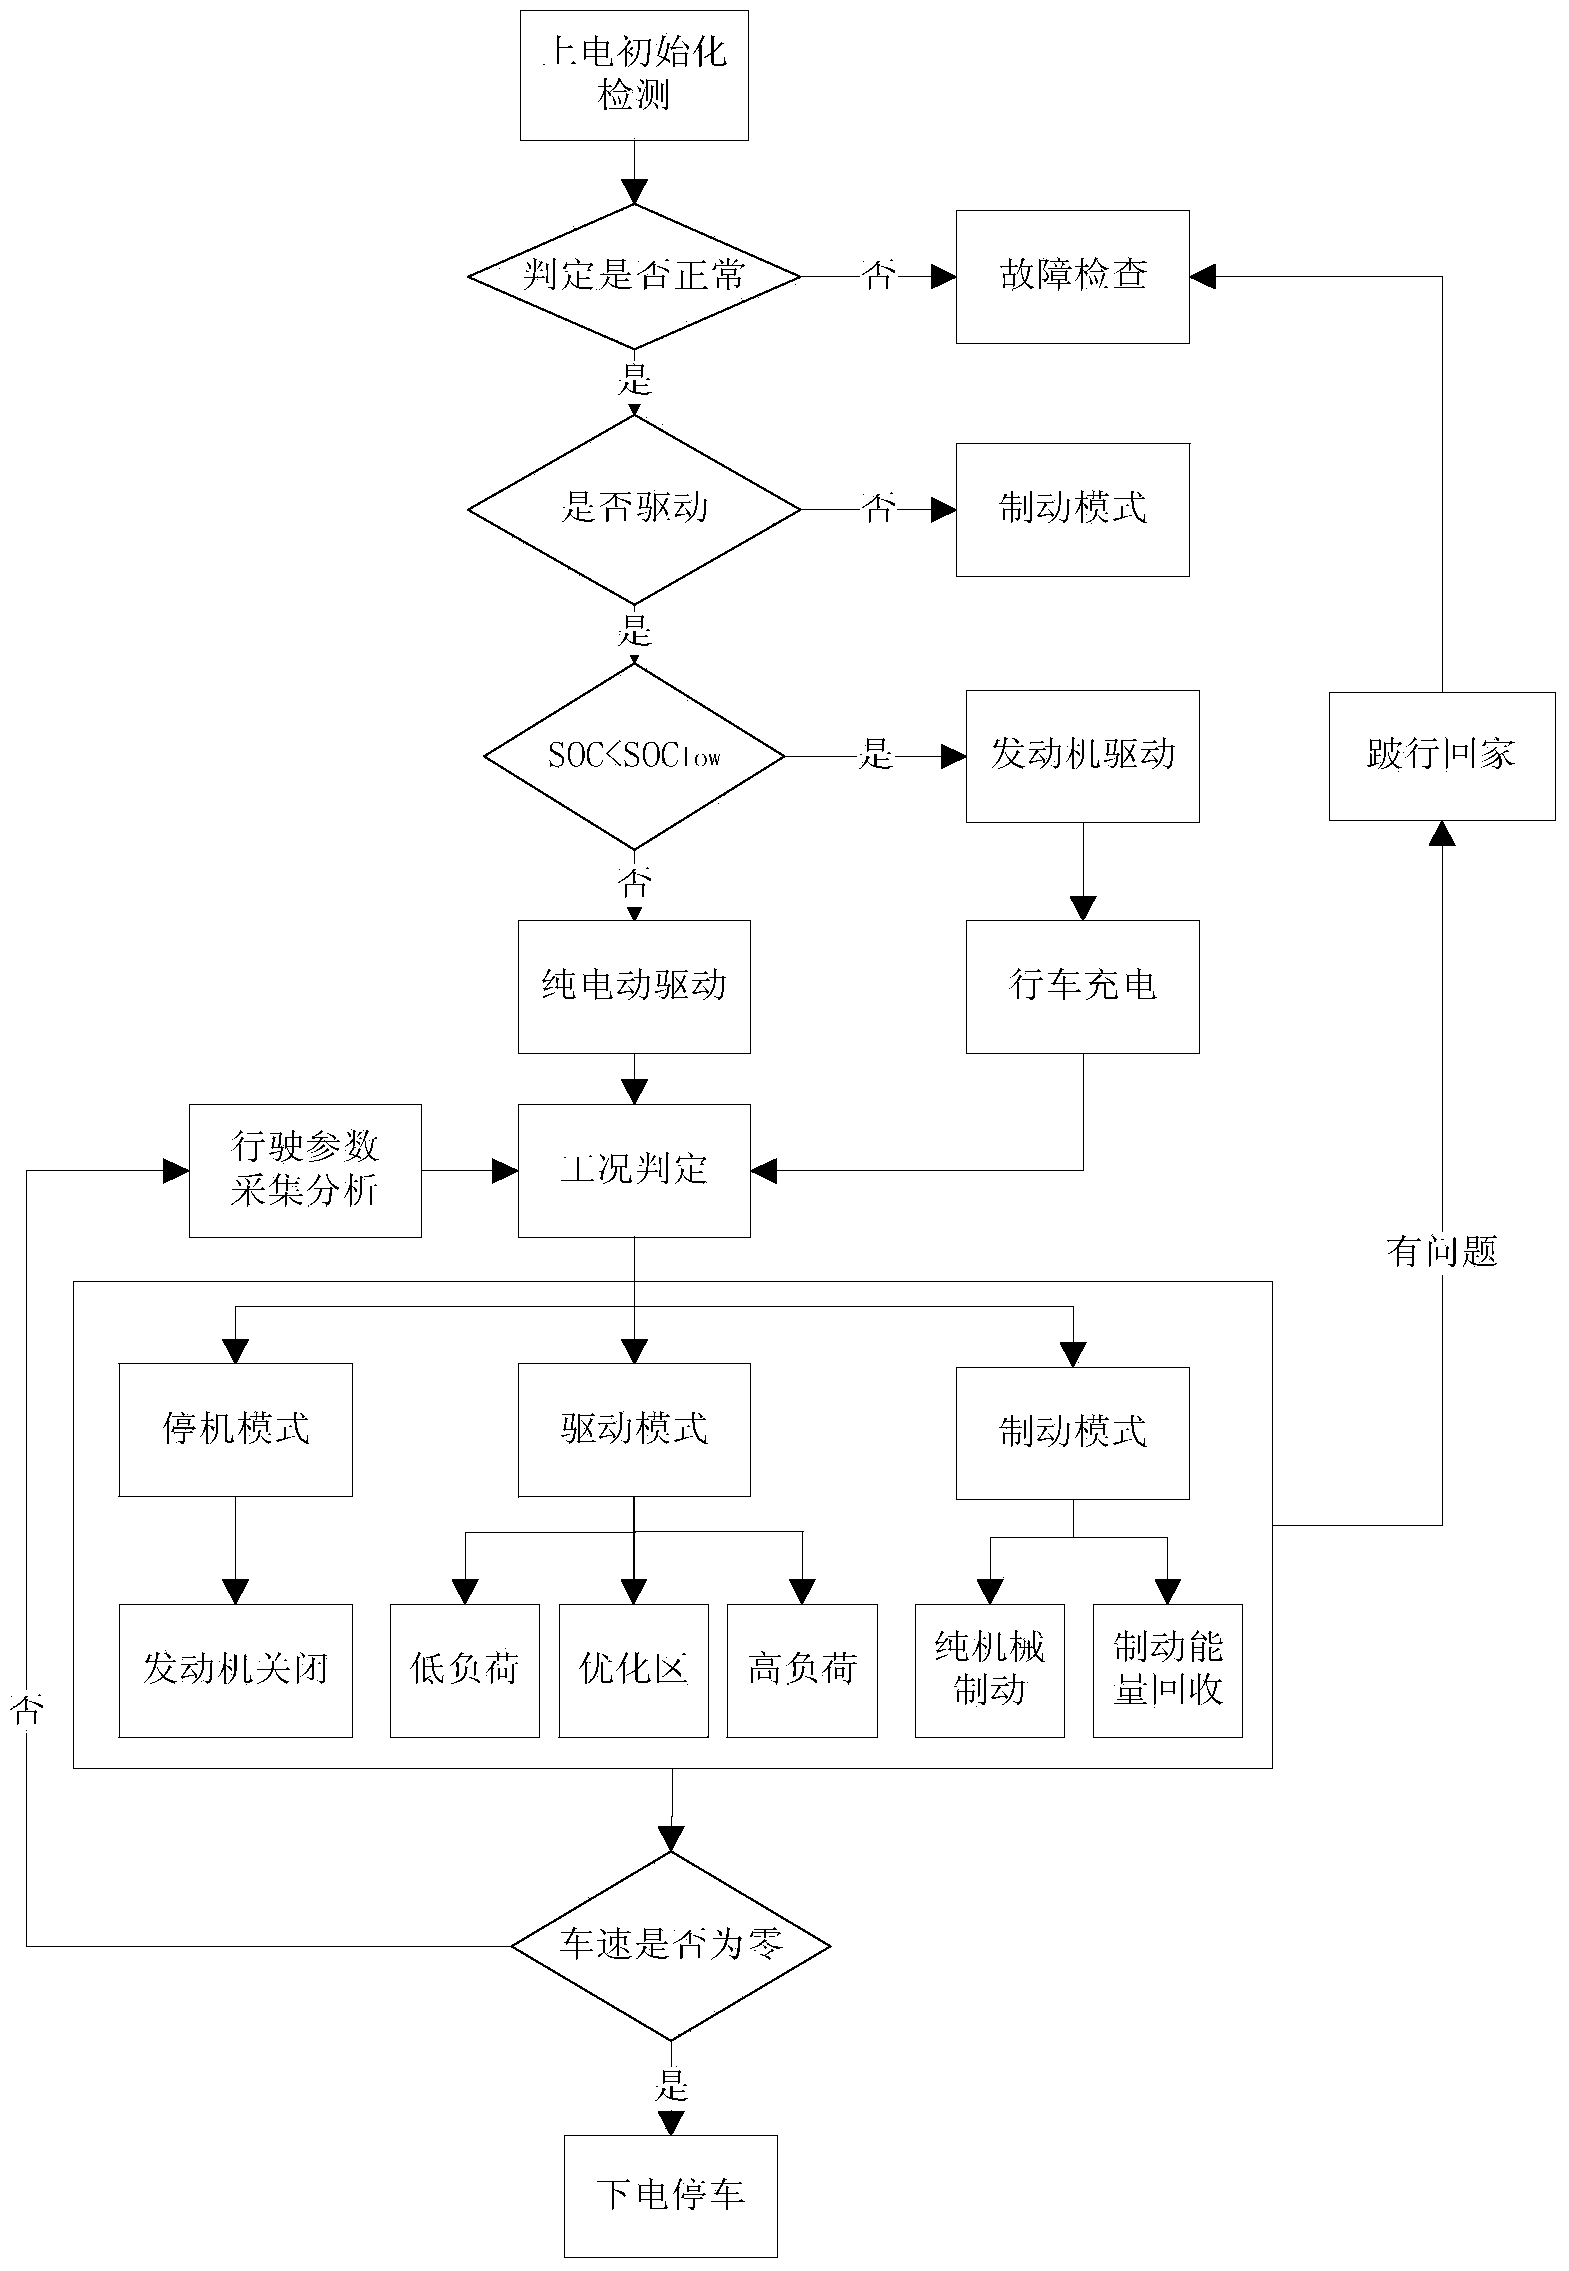 Energy distribution method for single-shaft parallel-connection hybrid electric bus